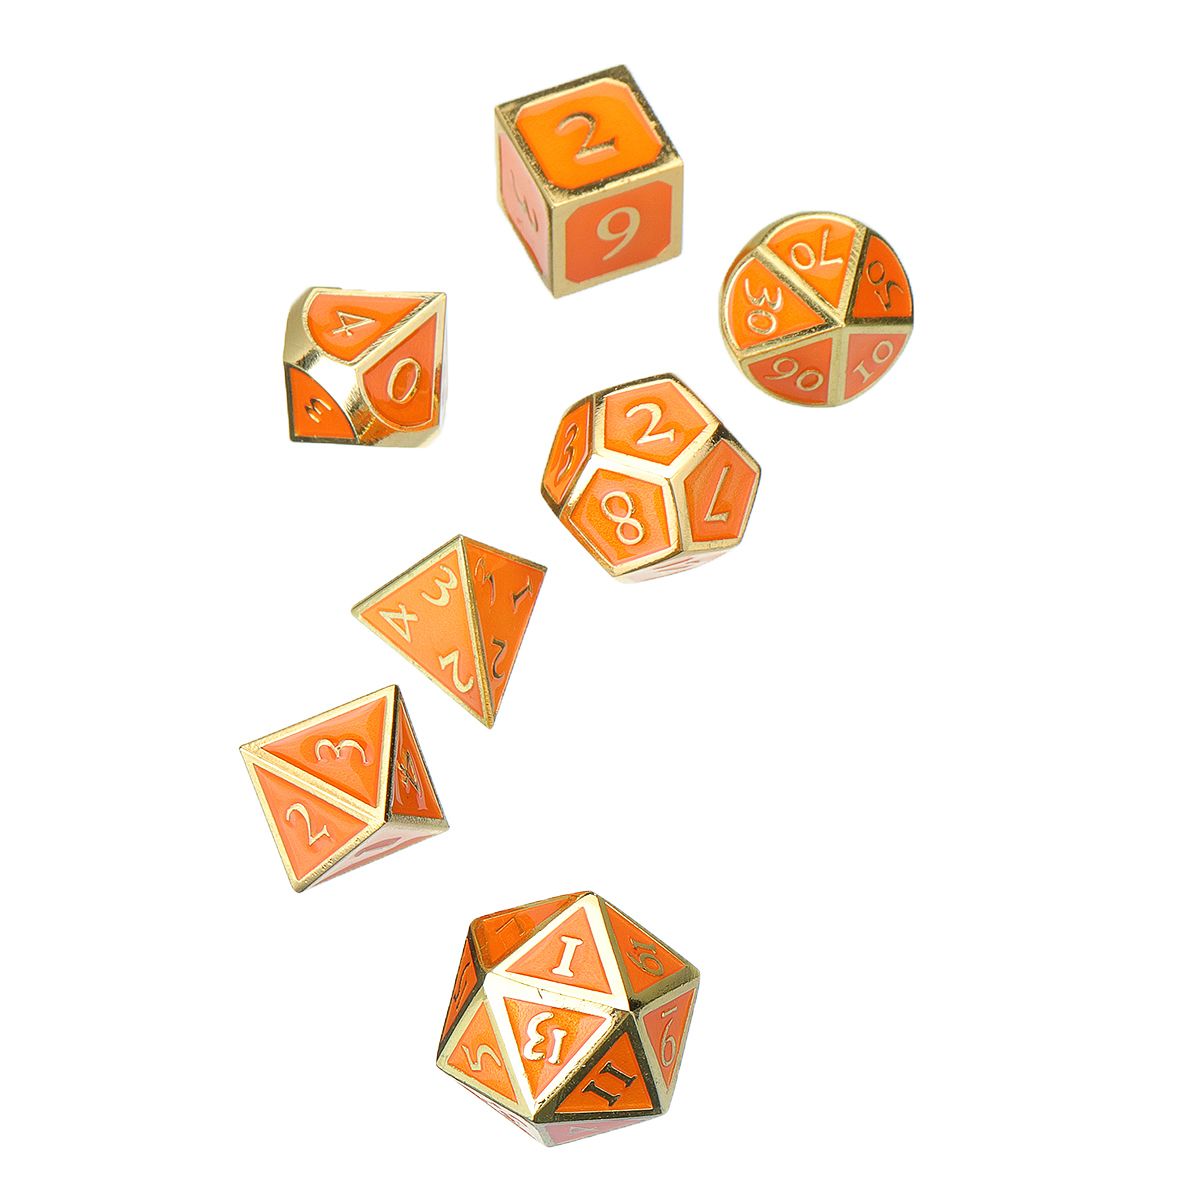 Solid-Metal-Heavy-Dice-Set-Polyhedral-Dices-Role-Playing-Games-Dice-Gadget-RPG-1391317